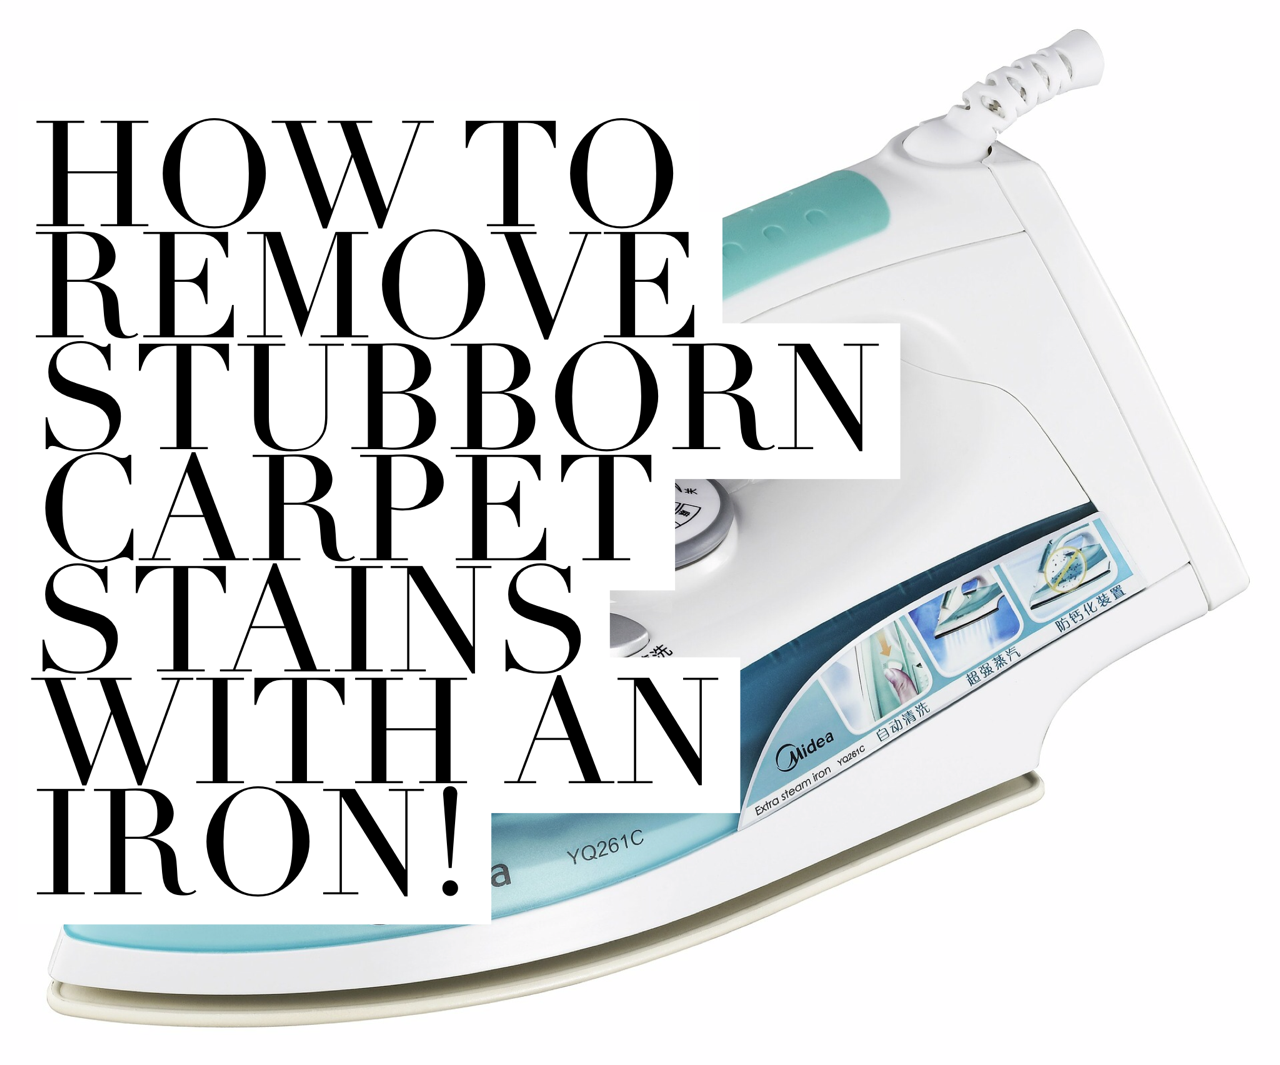 Carpet stain removal with an iron